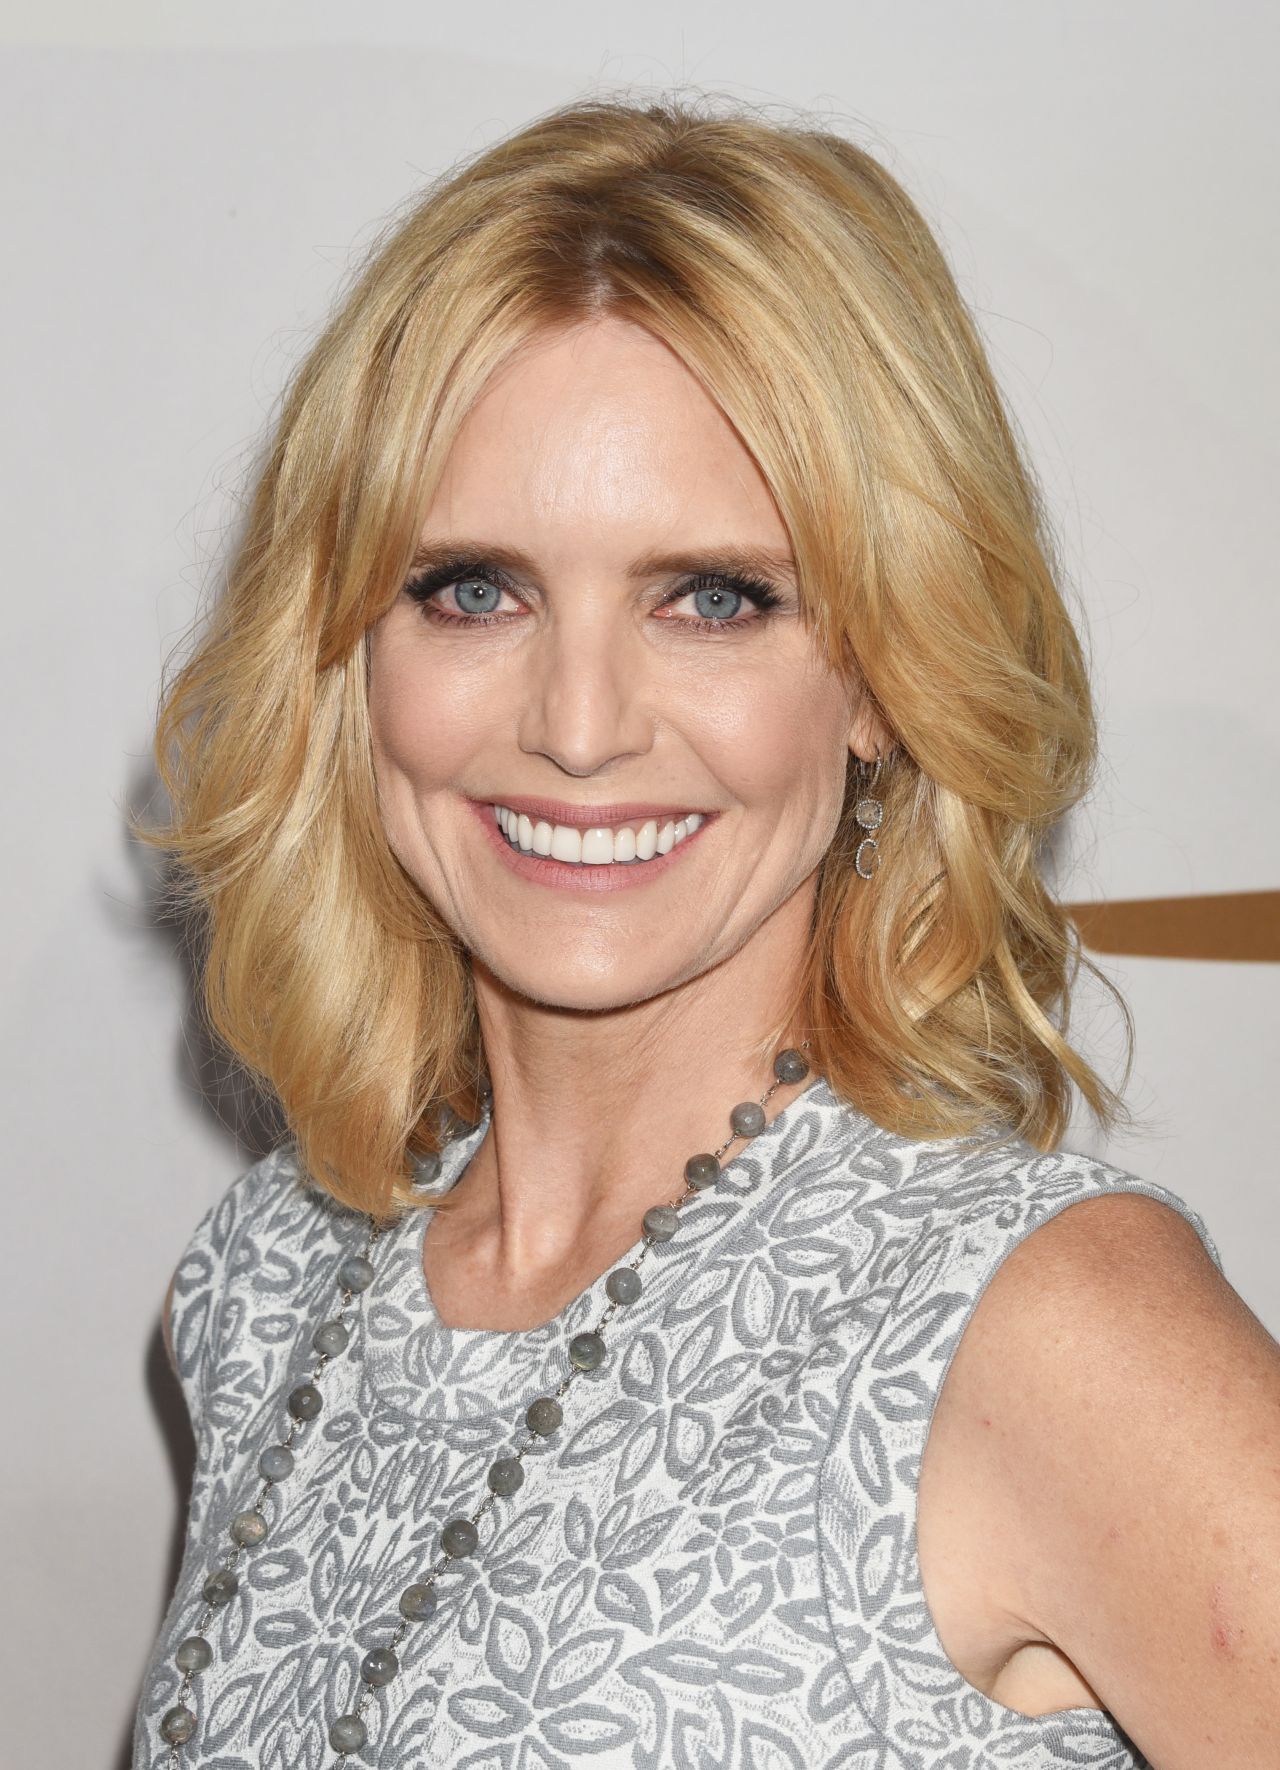 Courtney thorne-smith images